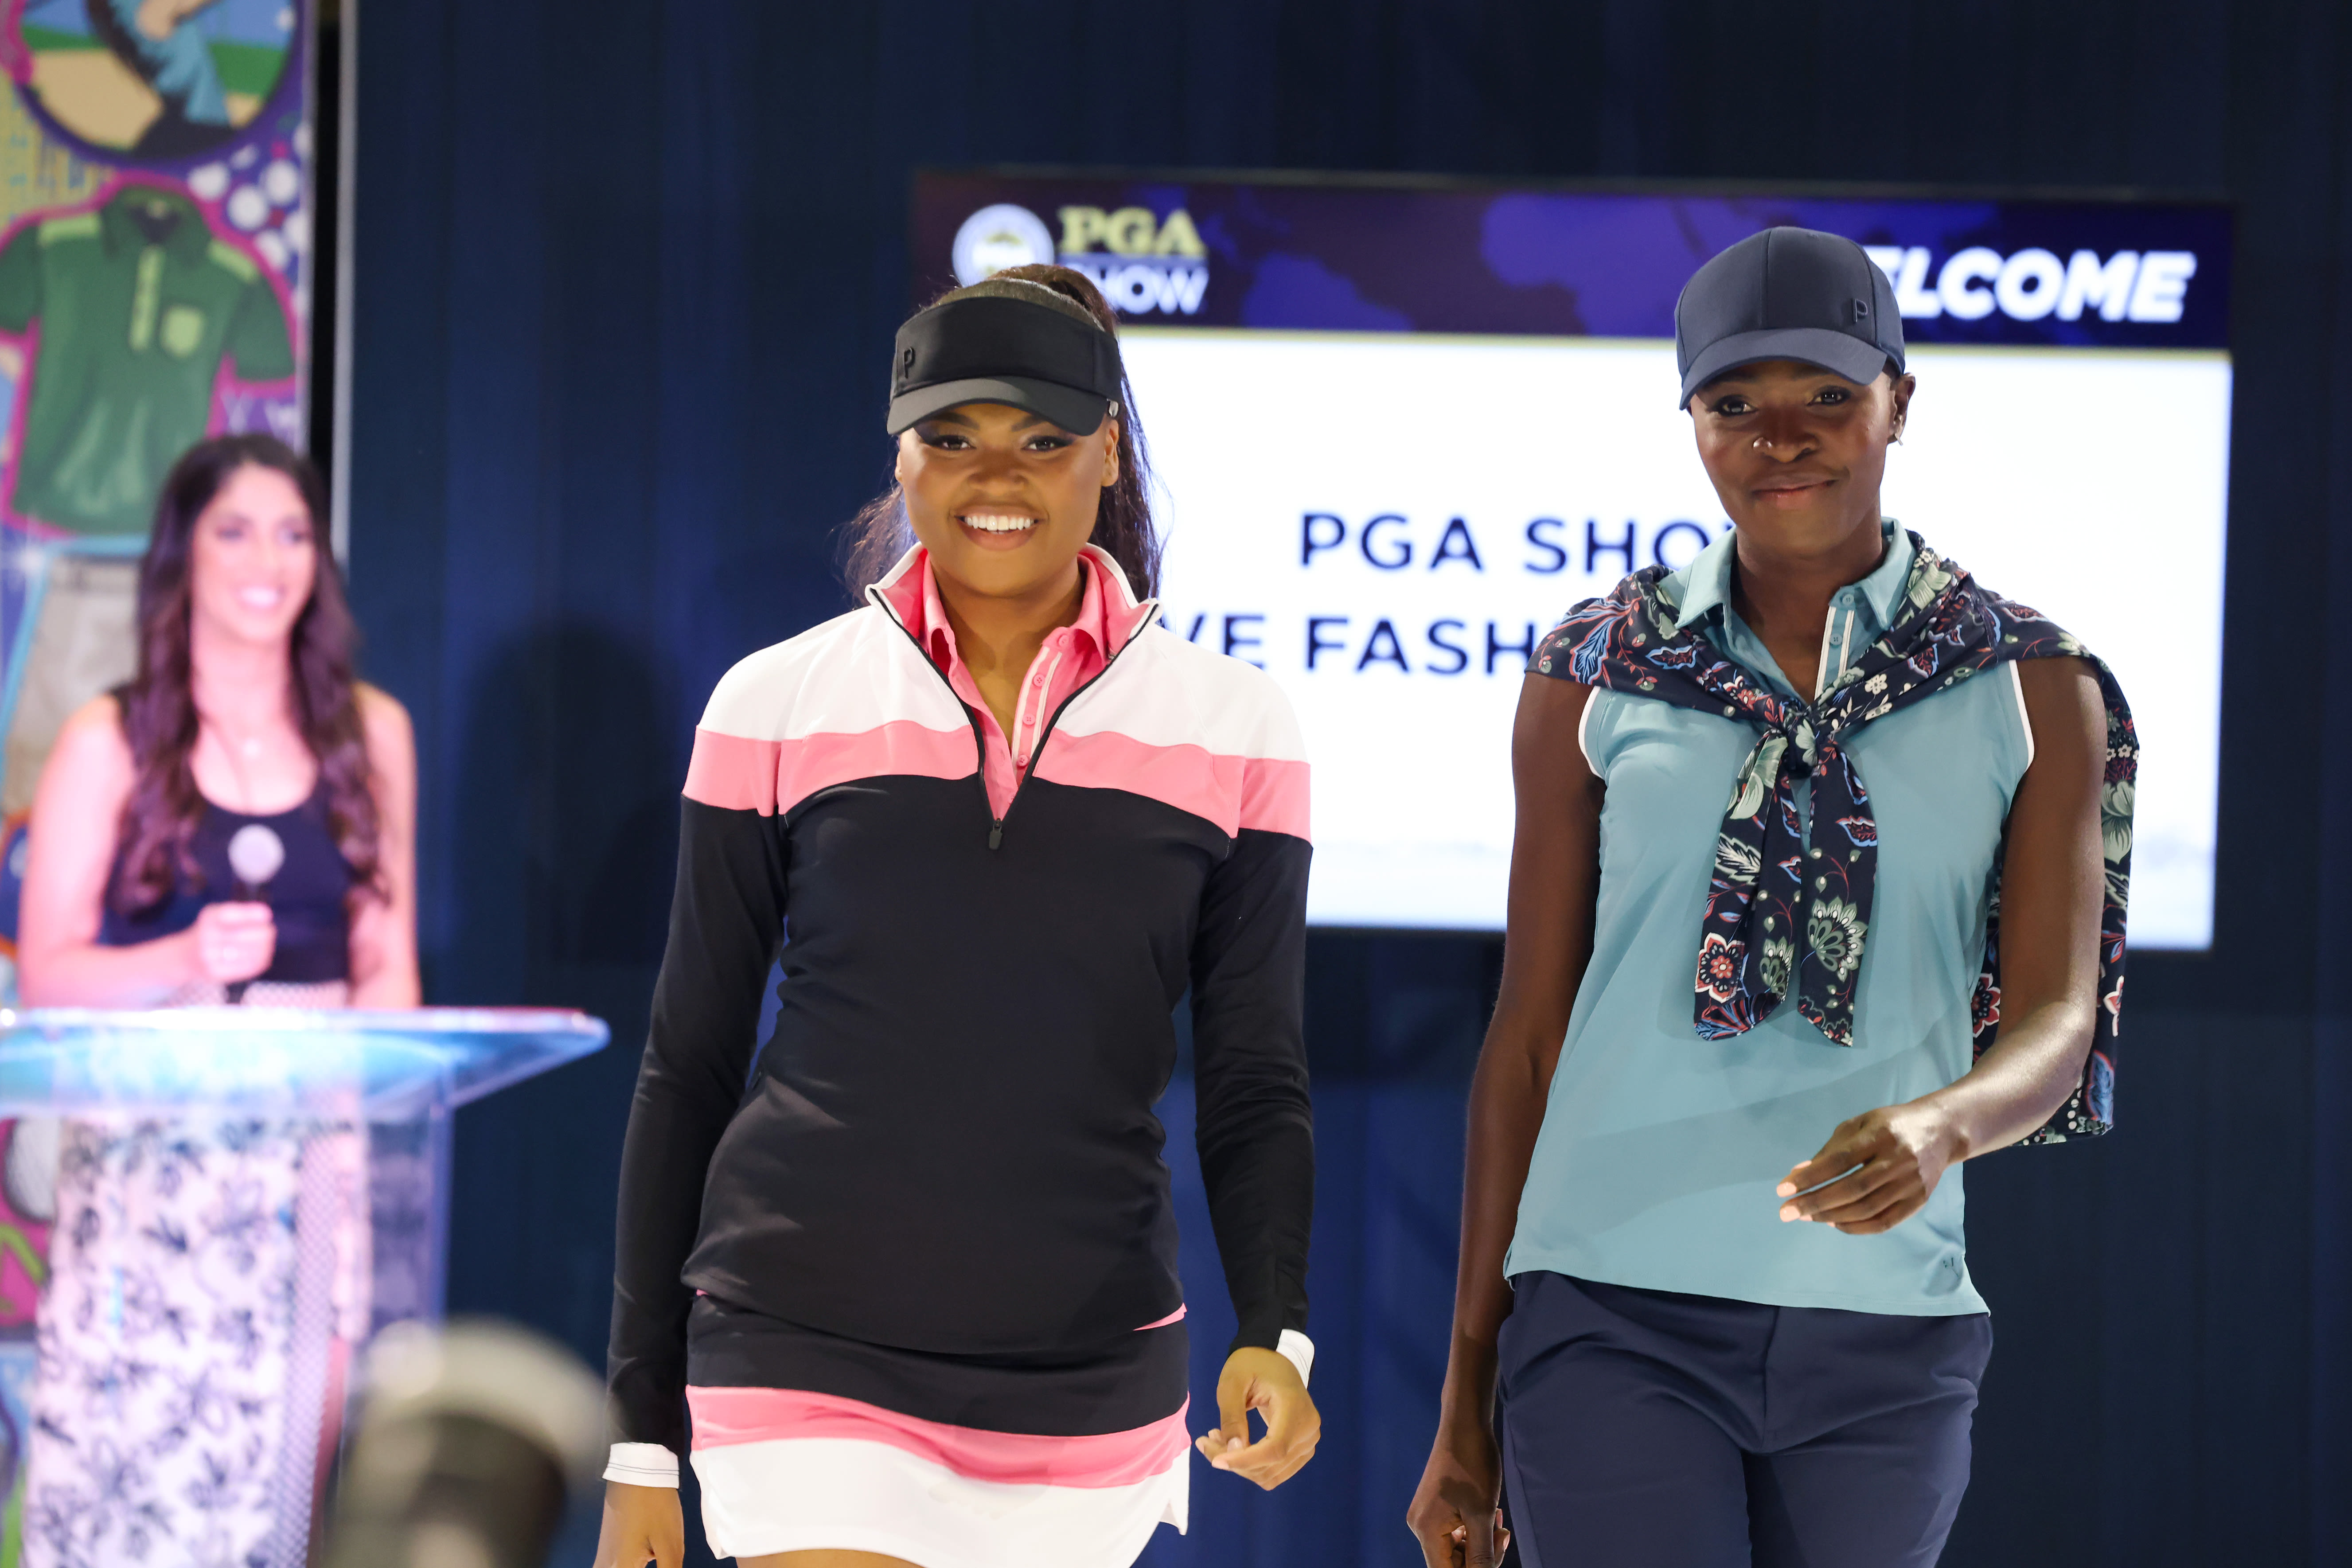 What to Wear: 5 of the Best Women's Golf Brands at the PGA Show